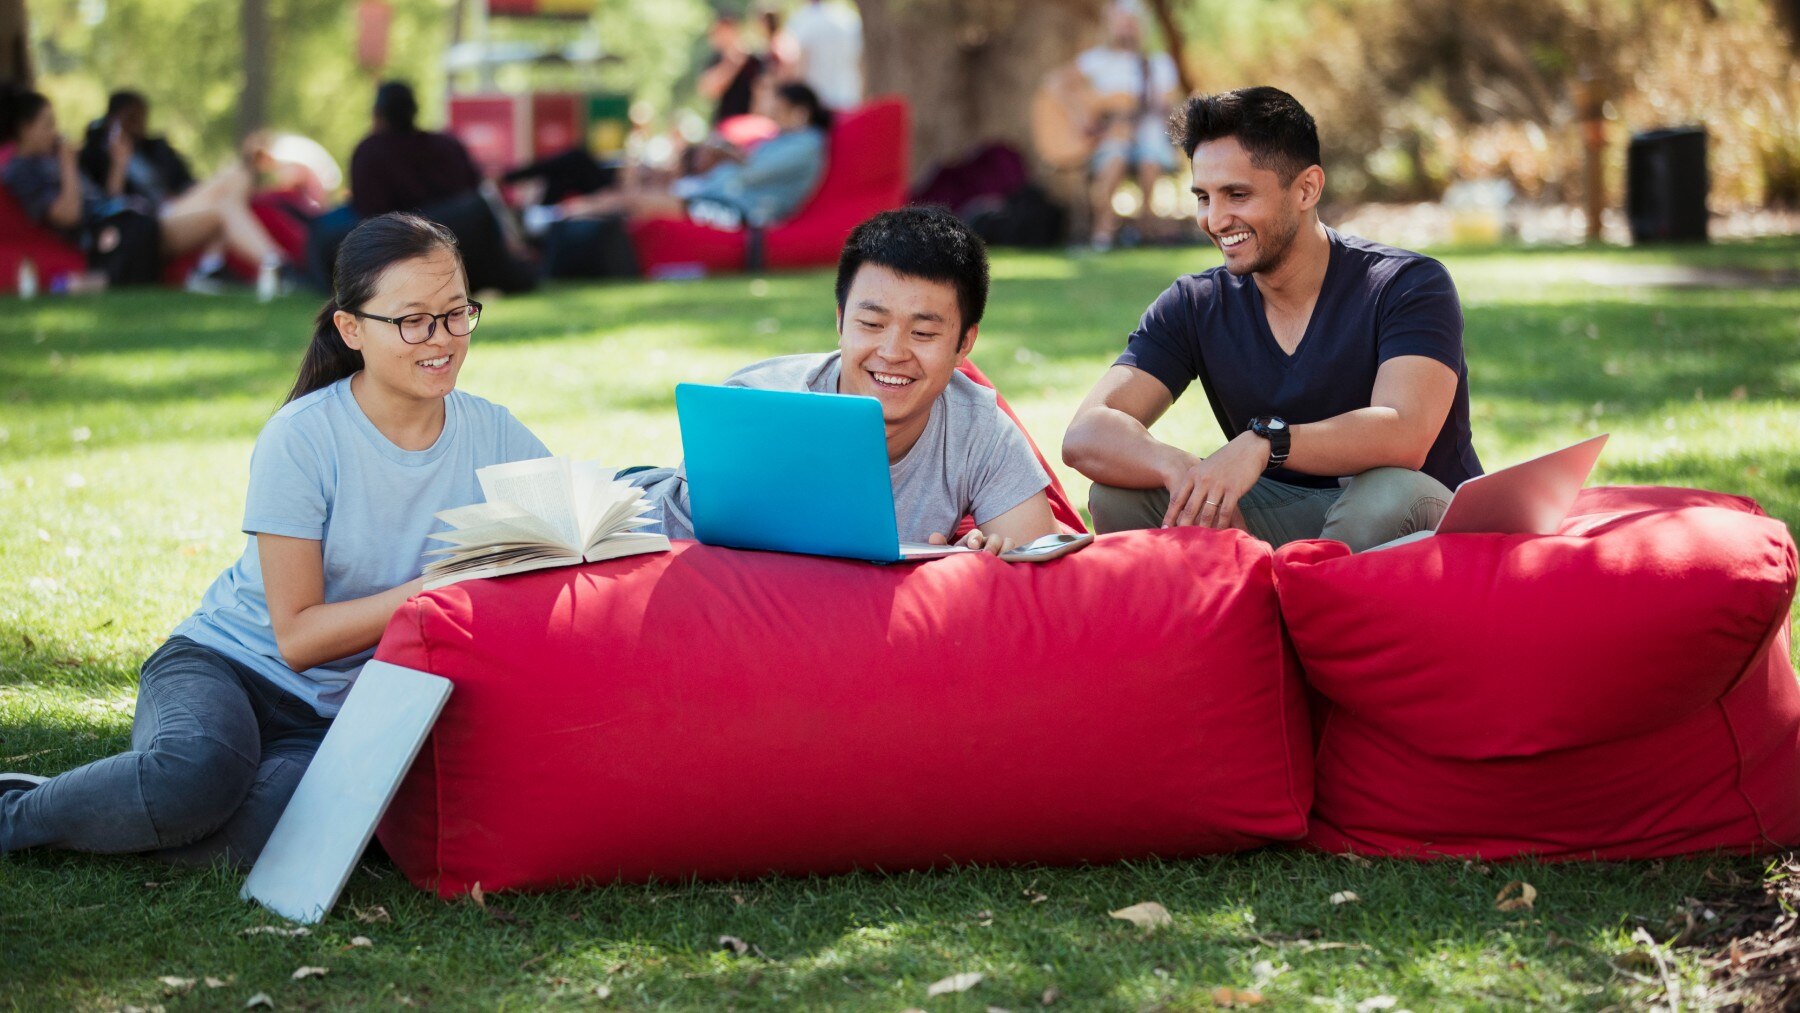 A group of multi ethnic students sitting together on bean bags outdoors on a sunny day in Perth.